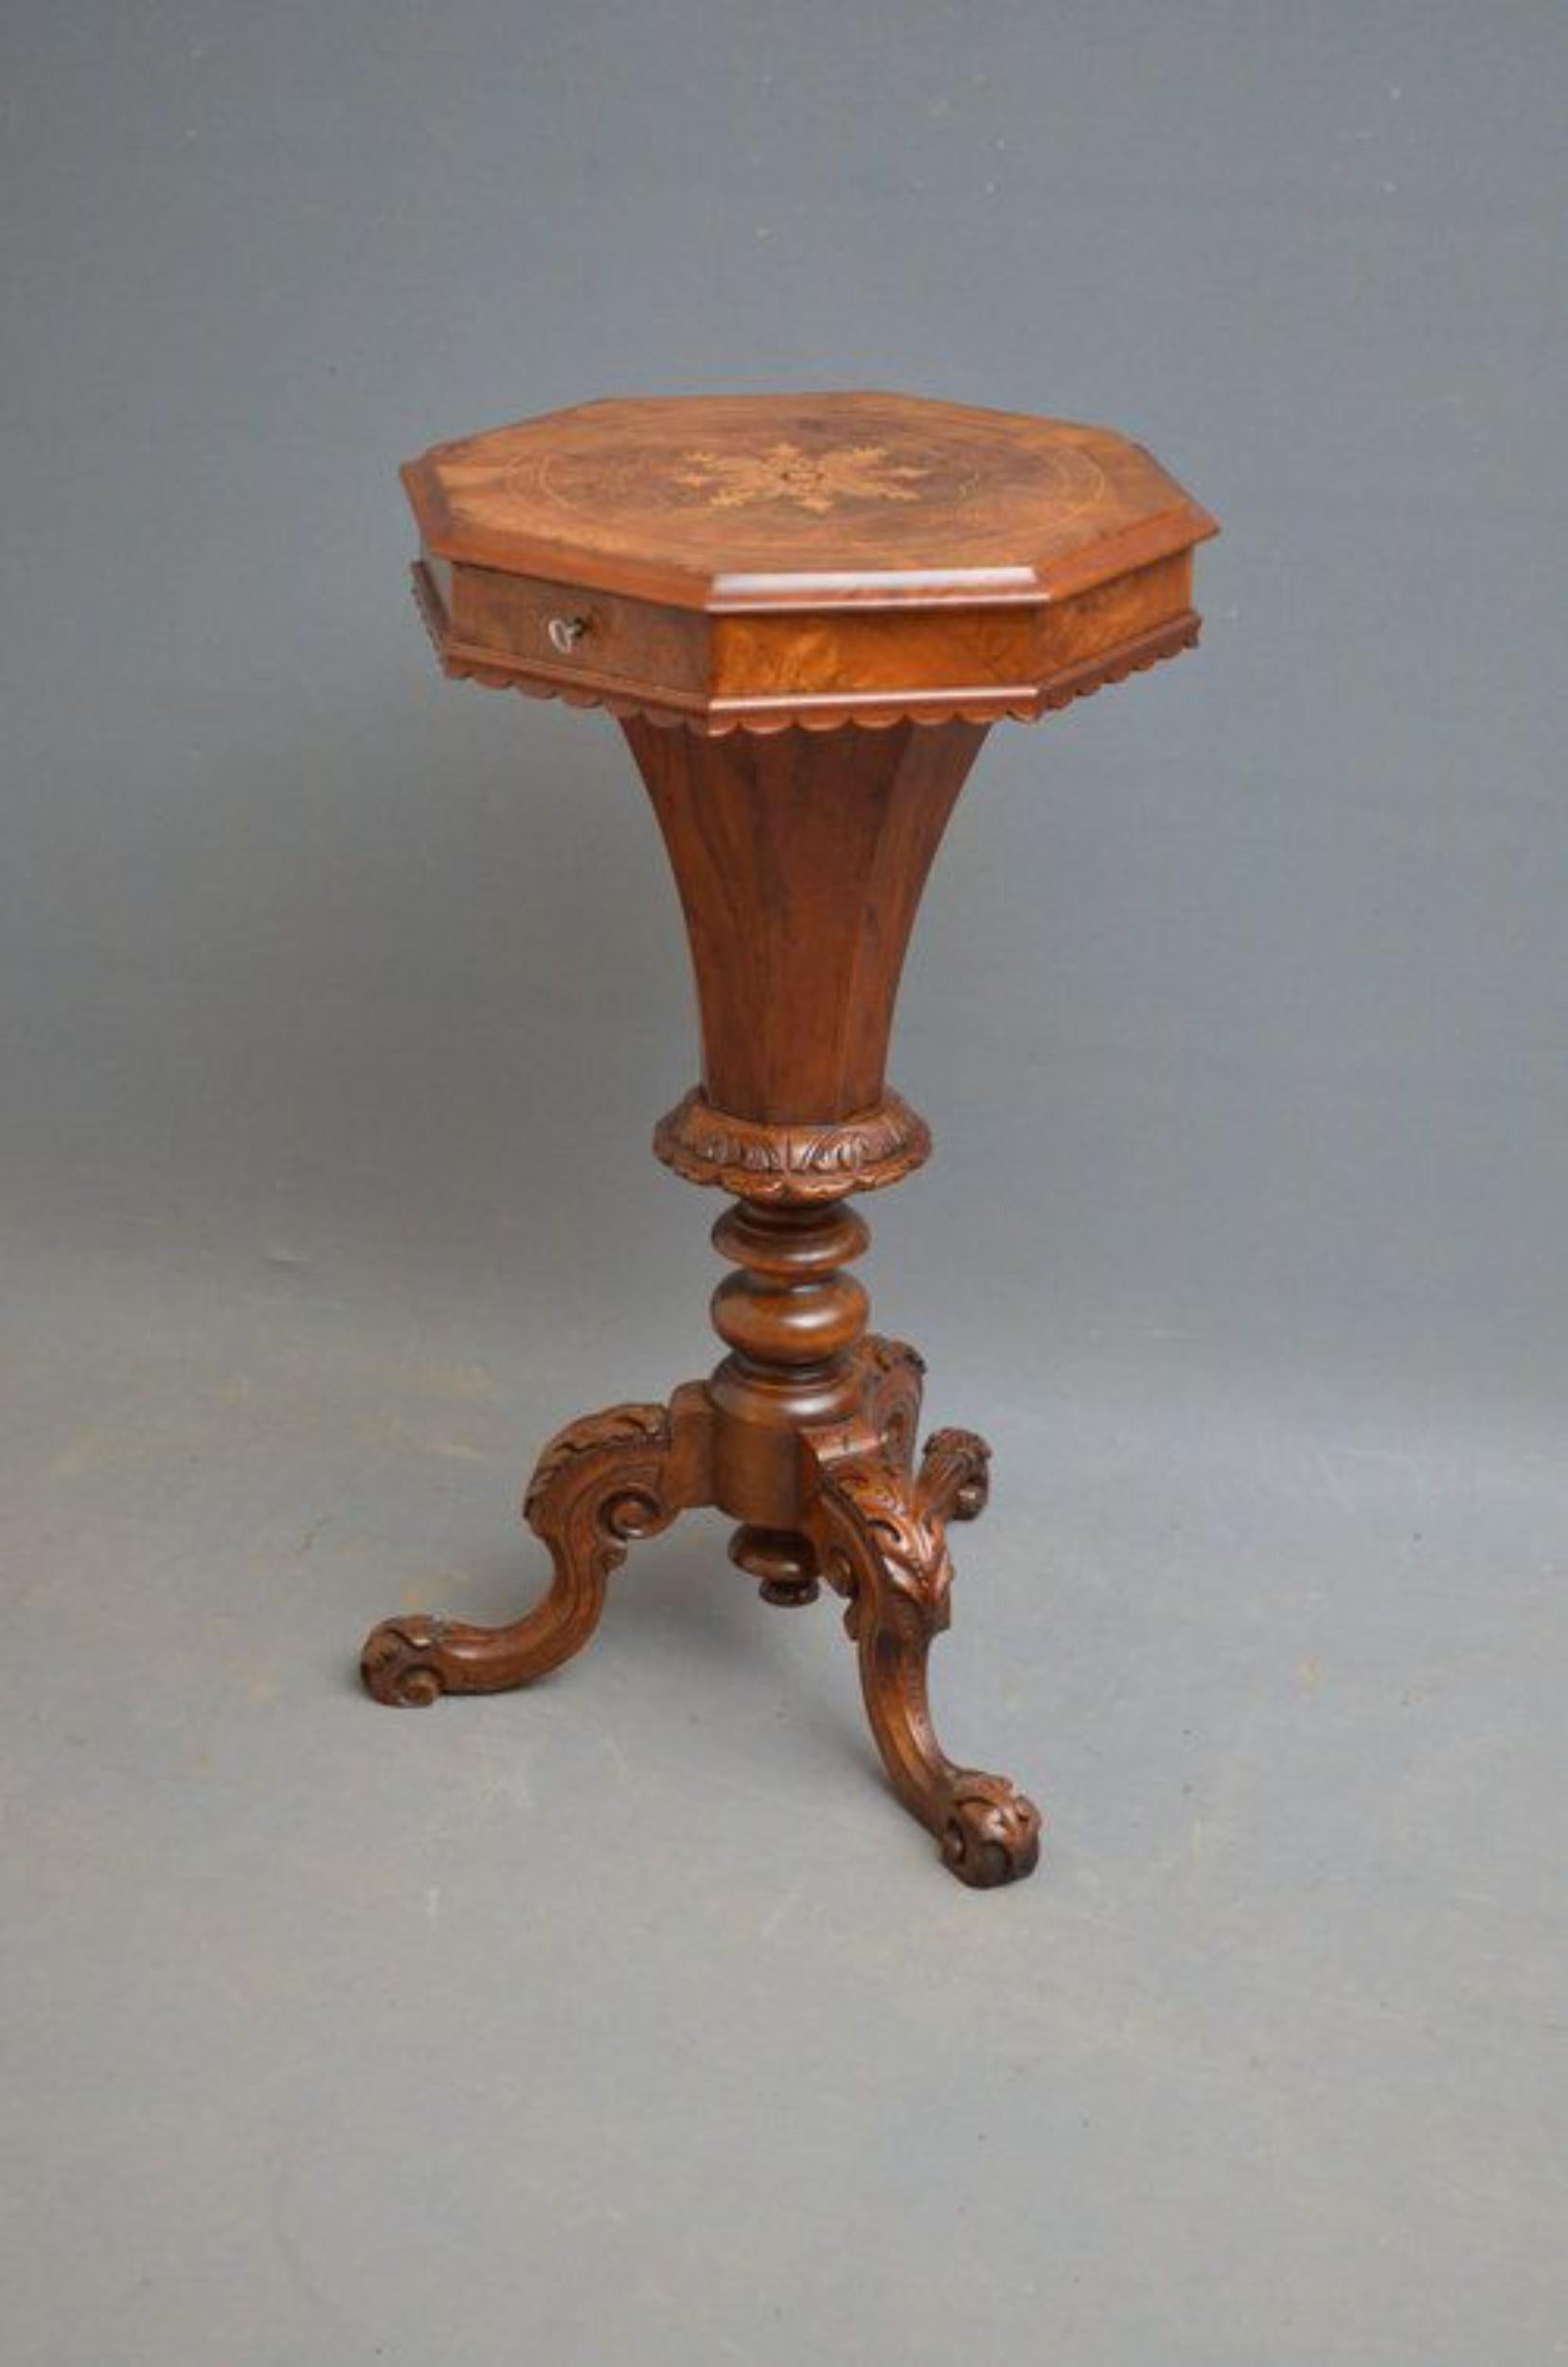 Sn3324 Victorian, walnut and burr walnut trumpet work table, having finely inlaid octagonal, hinged top which open to reveal original interior with small compartments, standing on tapering trumpet shaped column terminating in 3 carved cabriole legs,